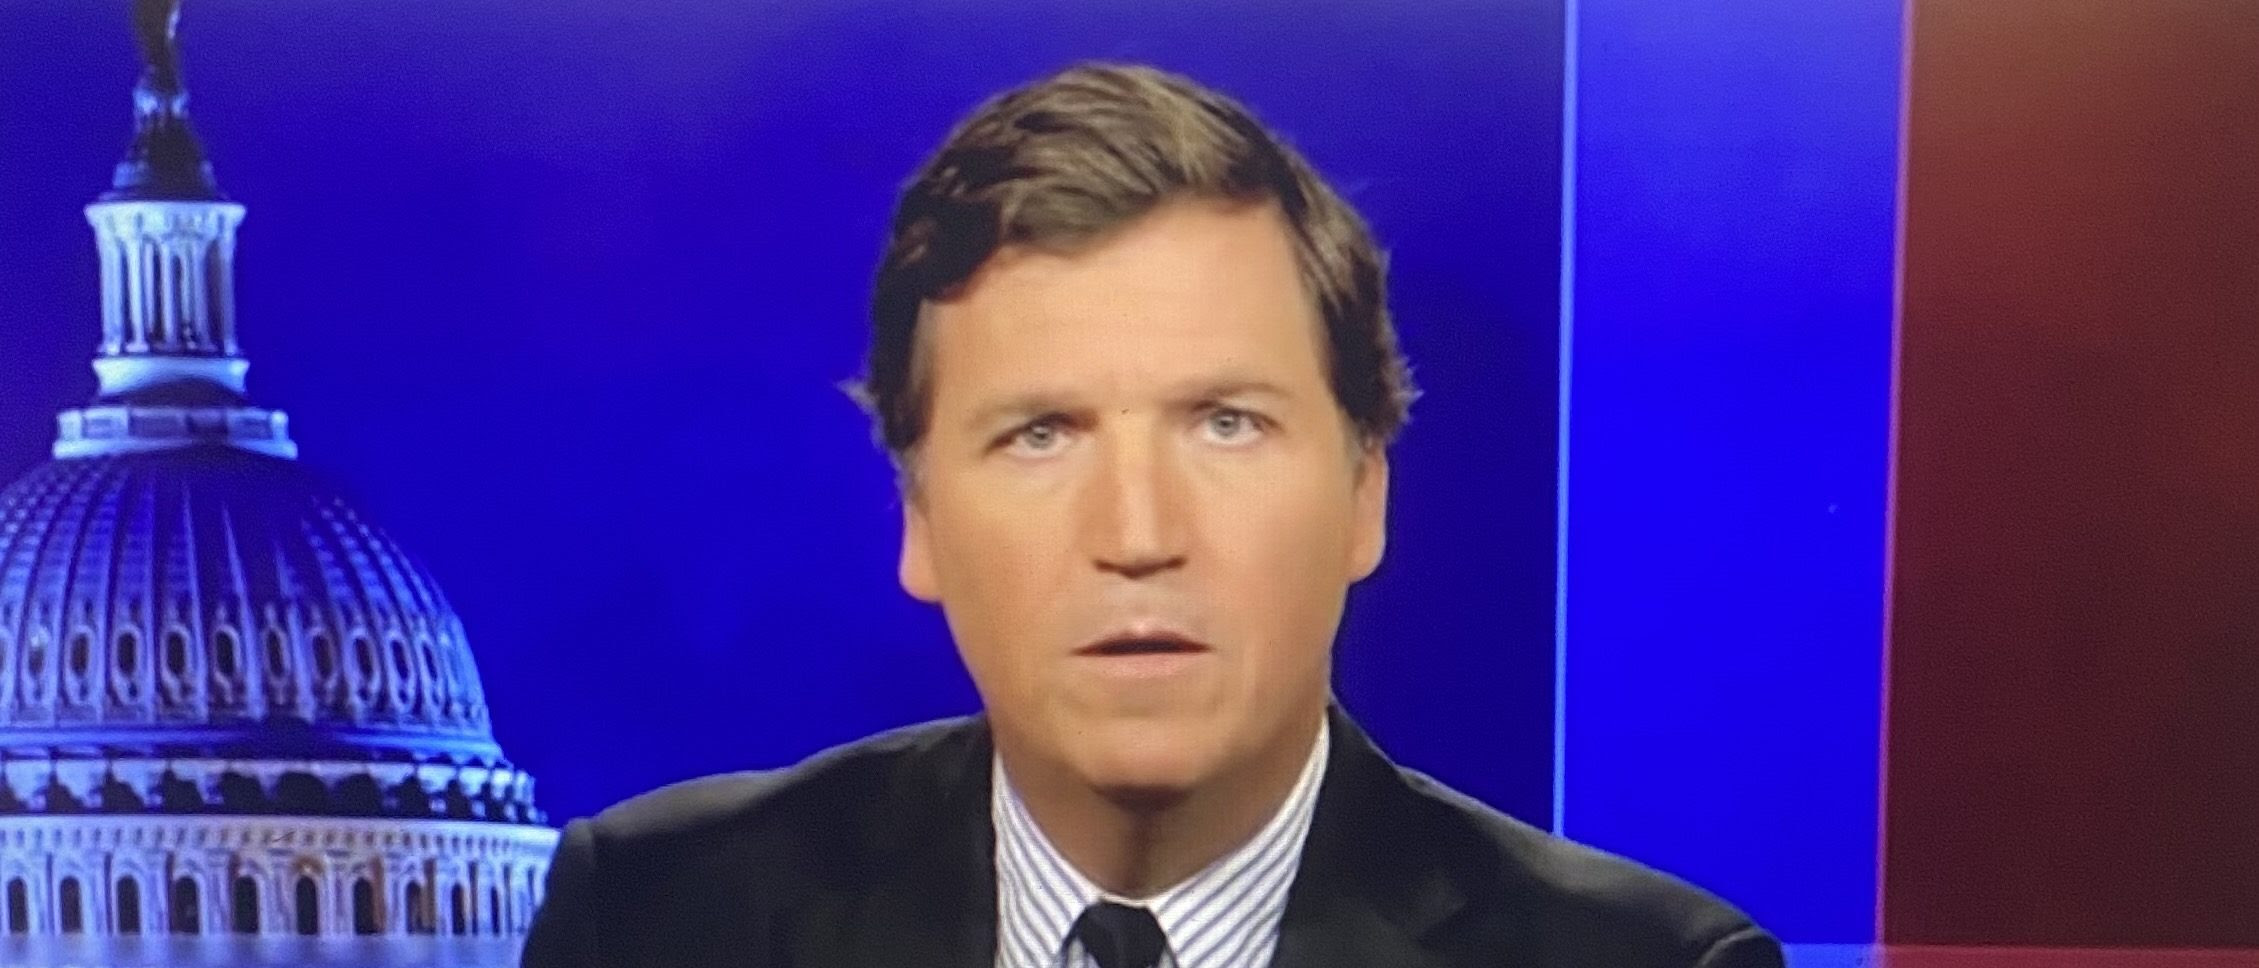 Tucker Carlson Rips Left-Wing Media For ‘Lying’ About Jan 6